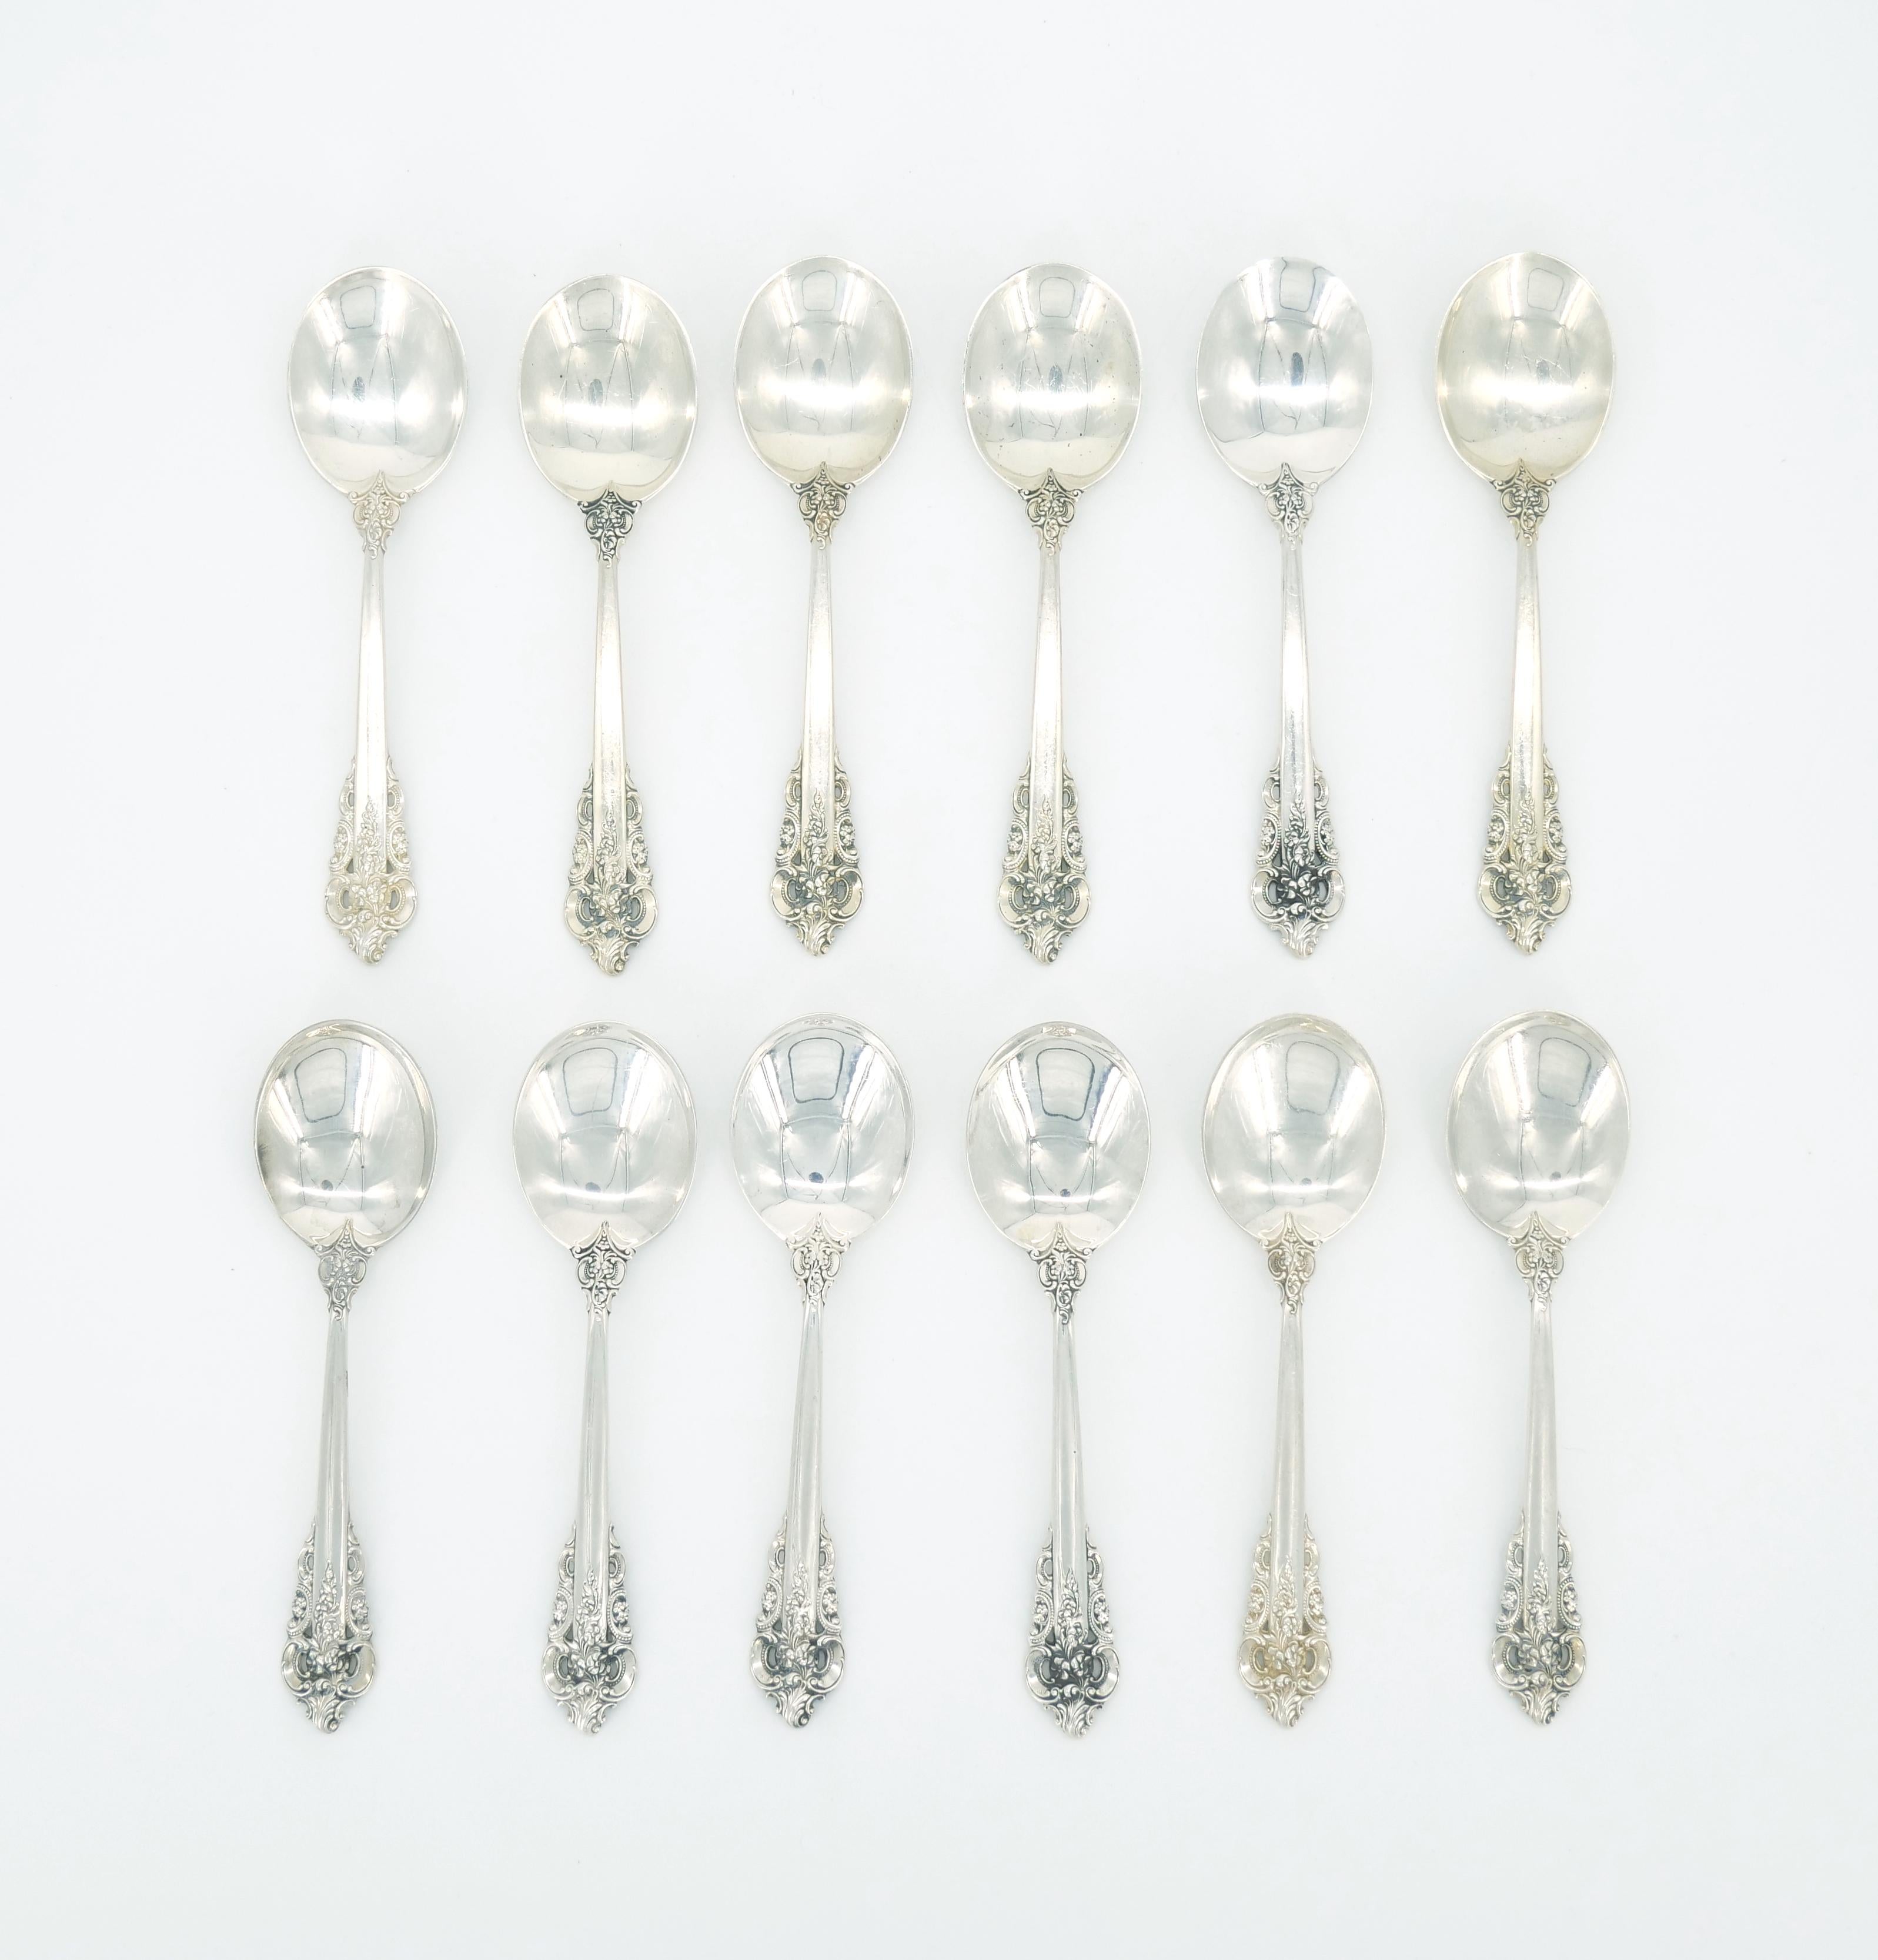 Early 20th Century Sterling Silver Flatware Service For 24 People In Good Condition For Sale In Tarry Town, NY